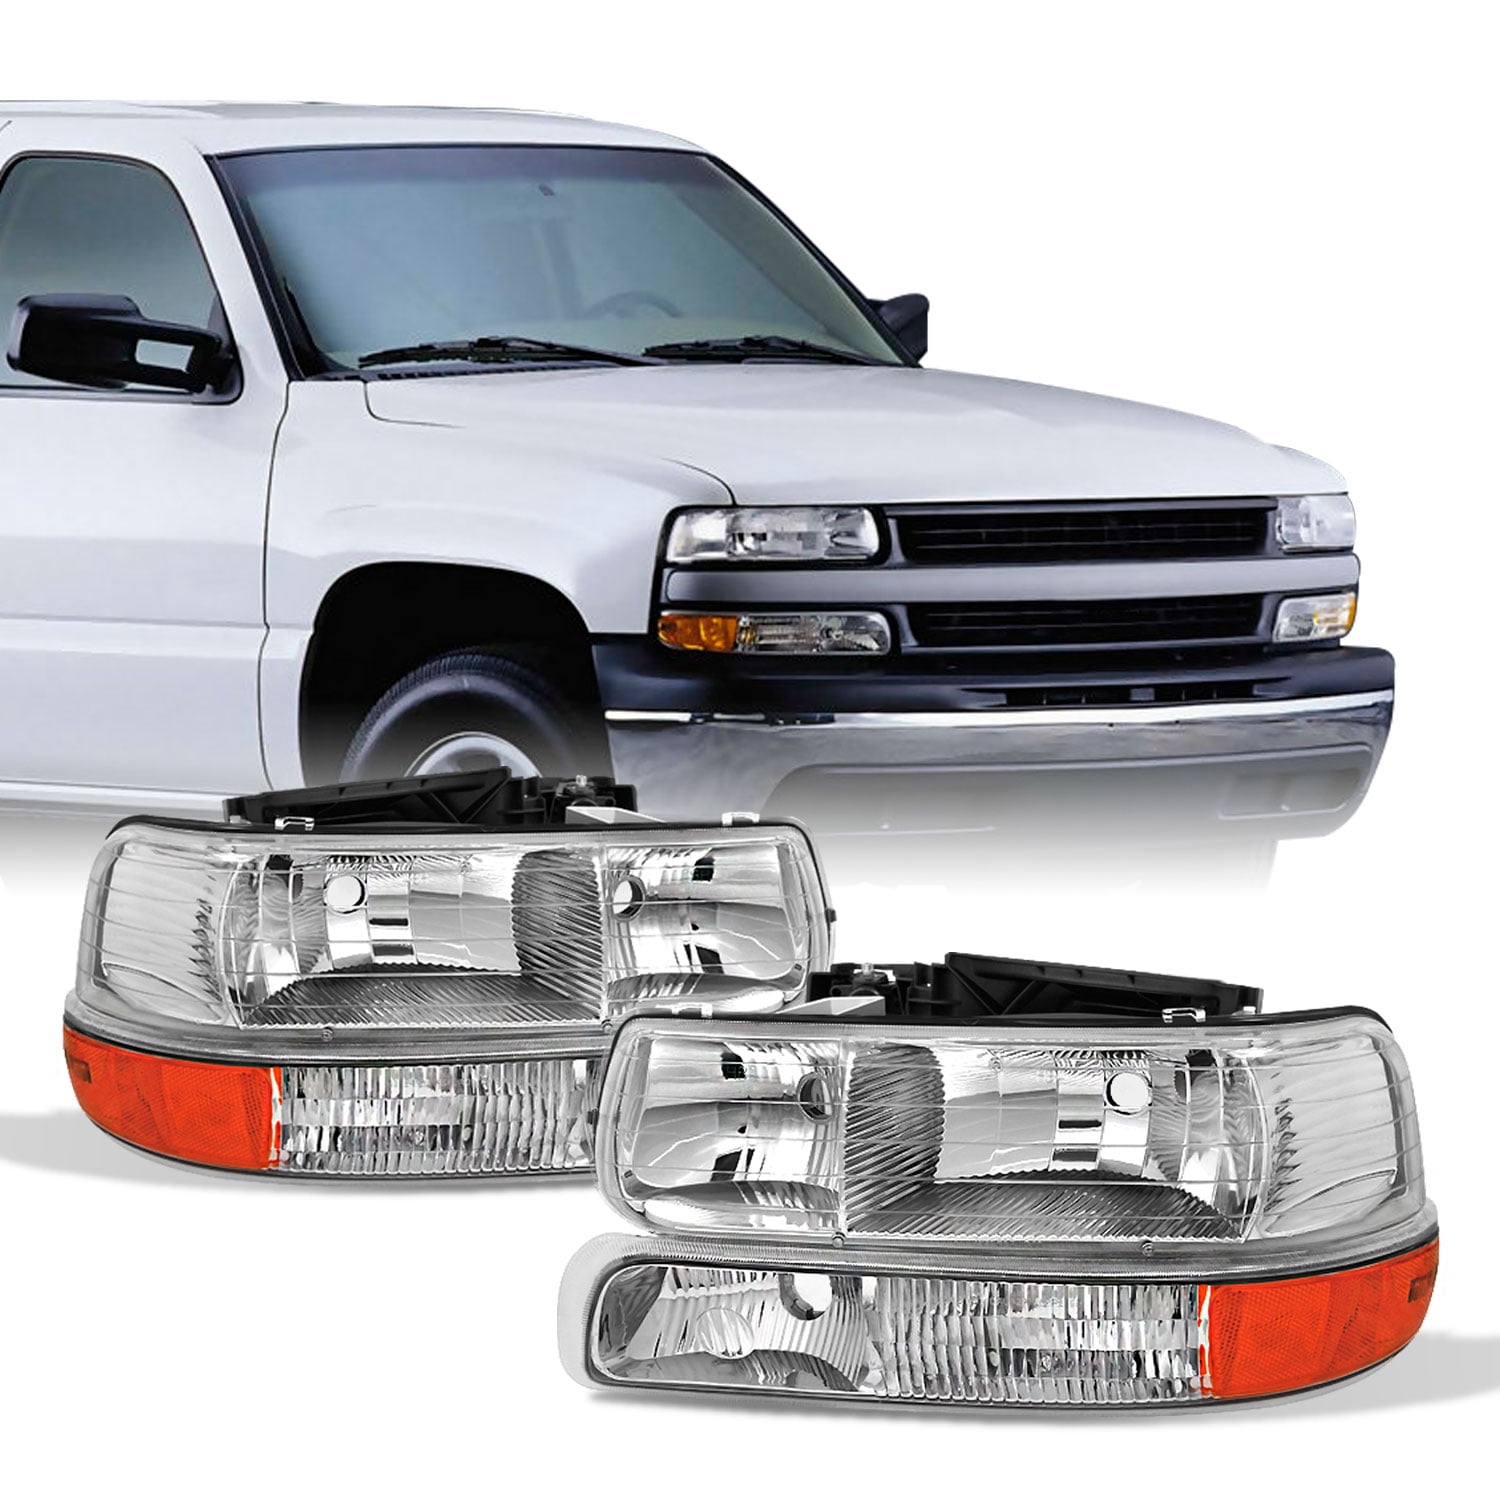 For 99-02 Silverado 00-06 Tahoe Suburban Clear LED Bumper Signal Lights Lamps 